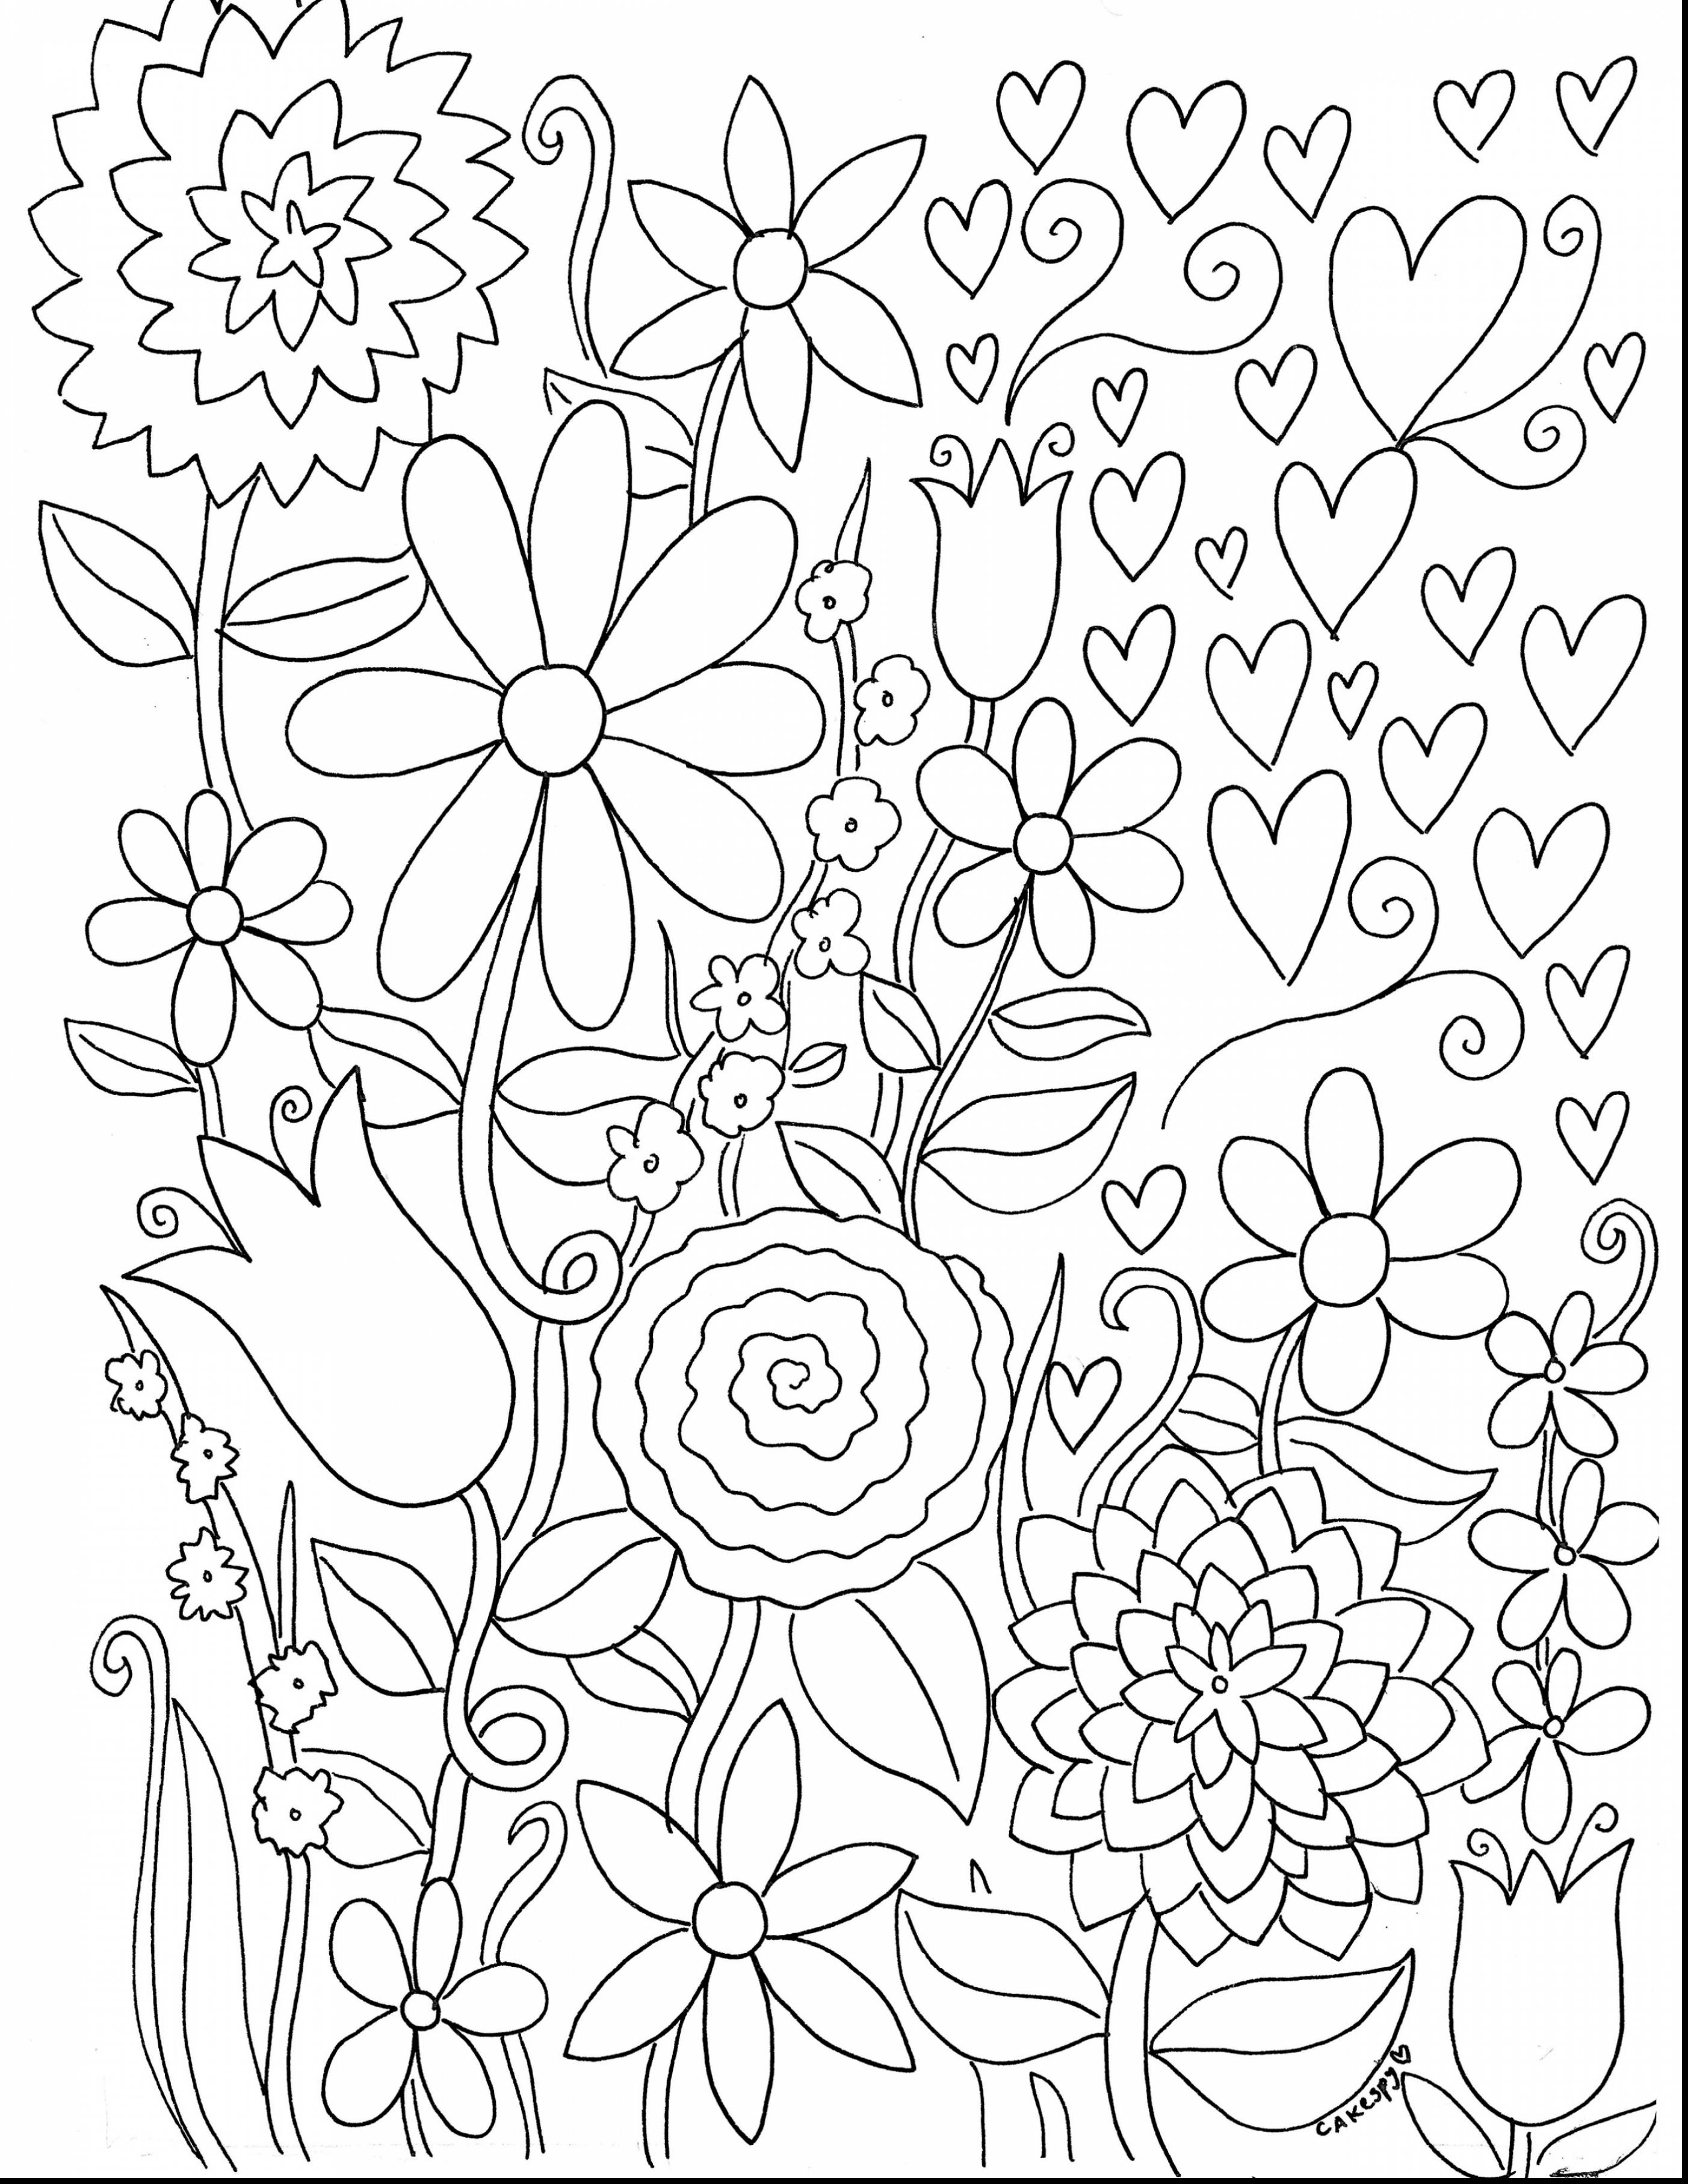 Rosebunny Designs Love Inspire Create Coloring Book by Mary Brijlall